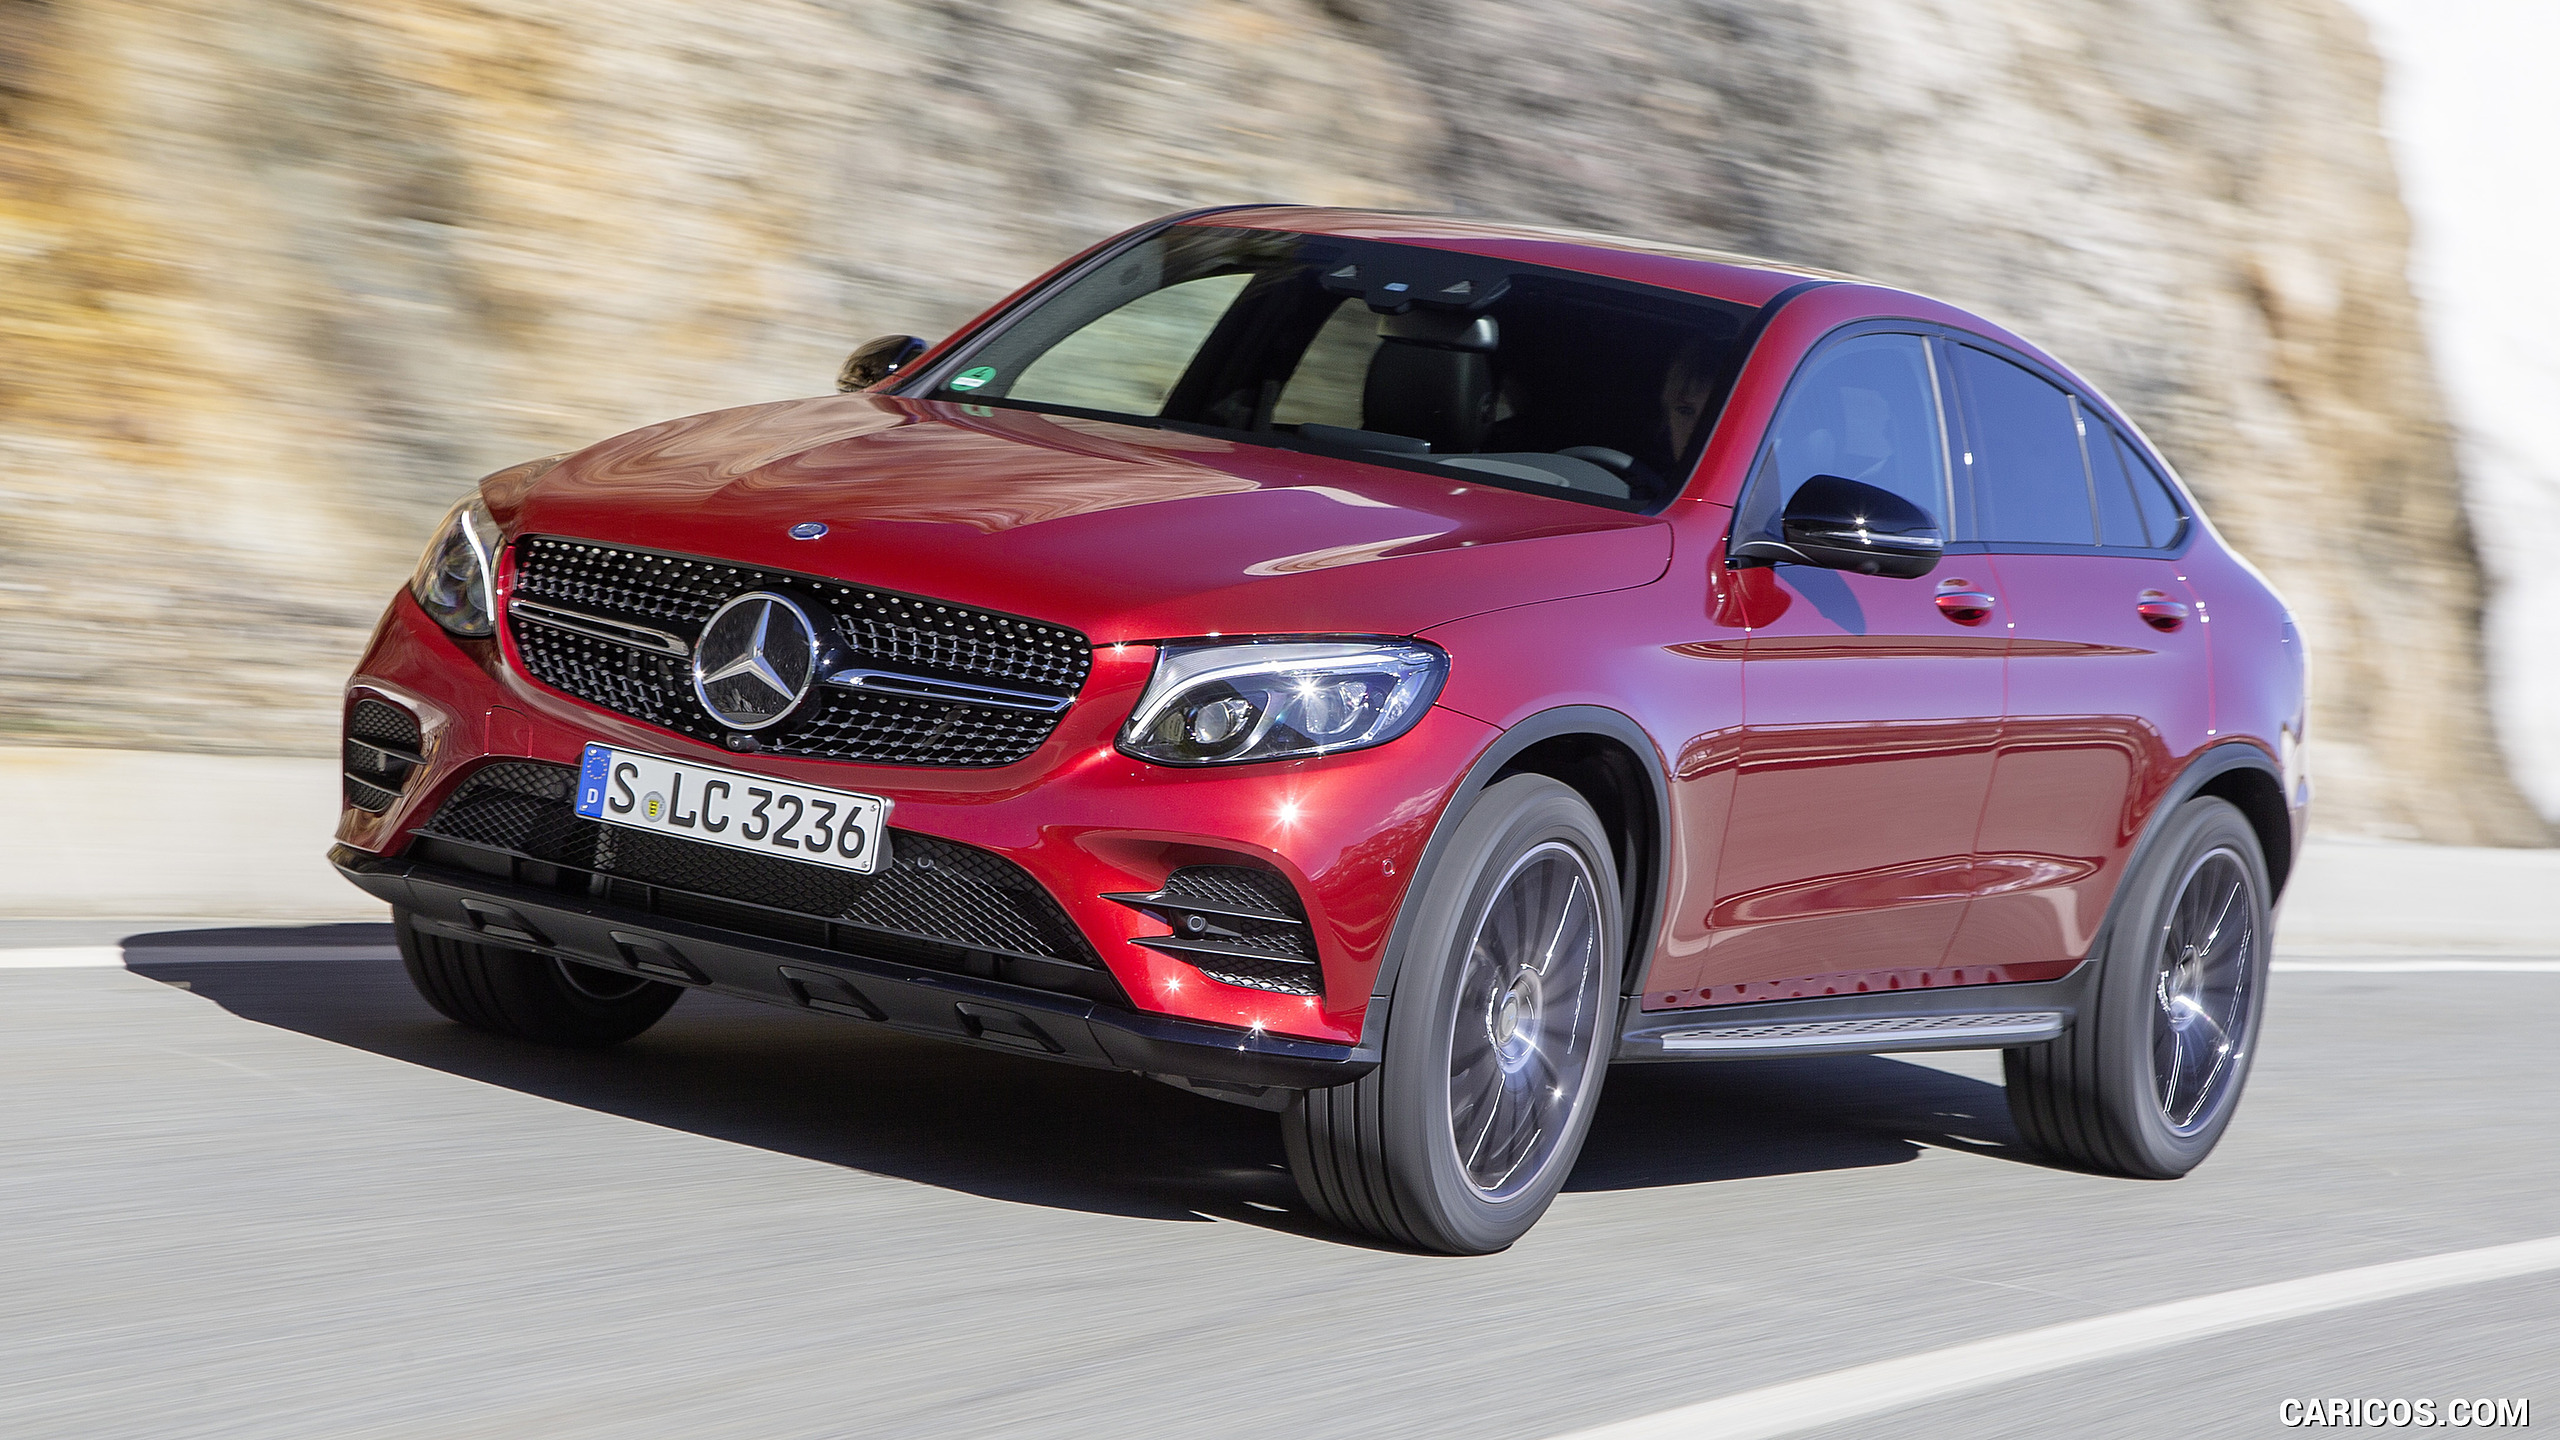 2017 Mercedes-Benz GLC 350 d Coupe (Diesel; Color: Hyacinth Red) - Front Three-Quarter, #63 of 144